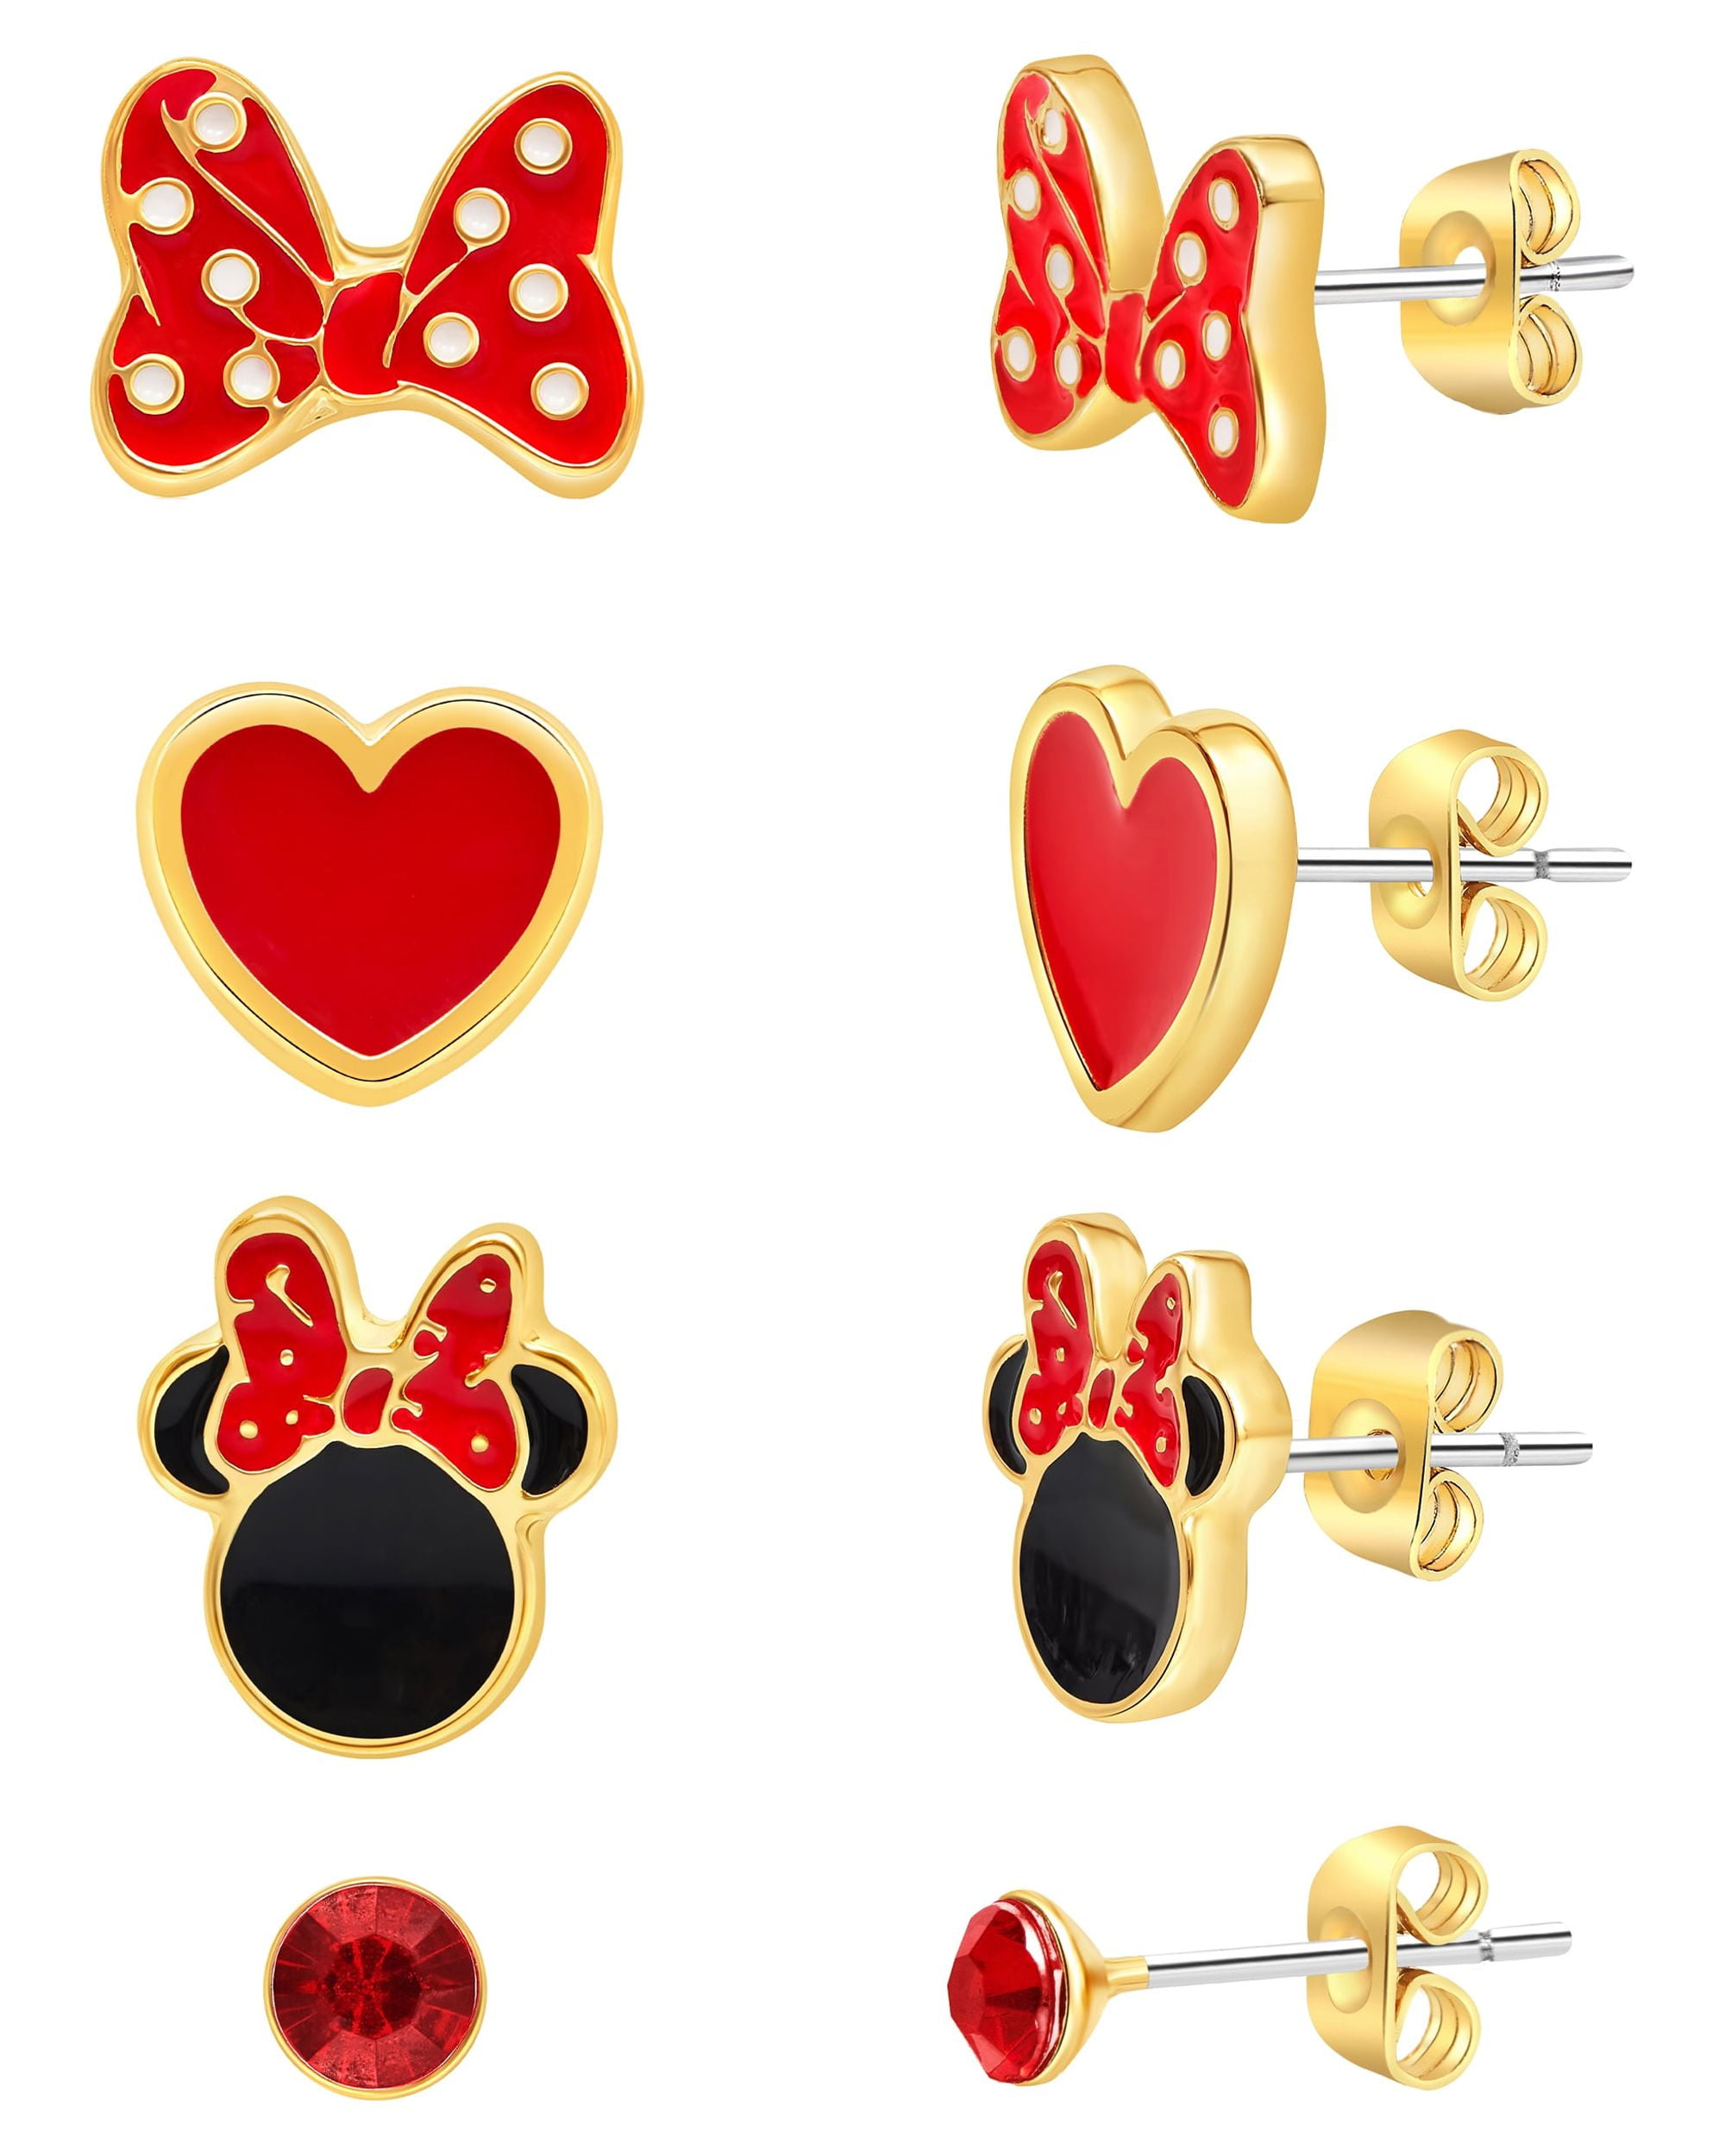 Aggregate 223+ gold mickey mouse earrings latest